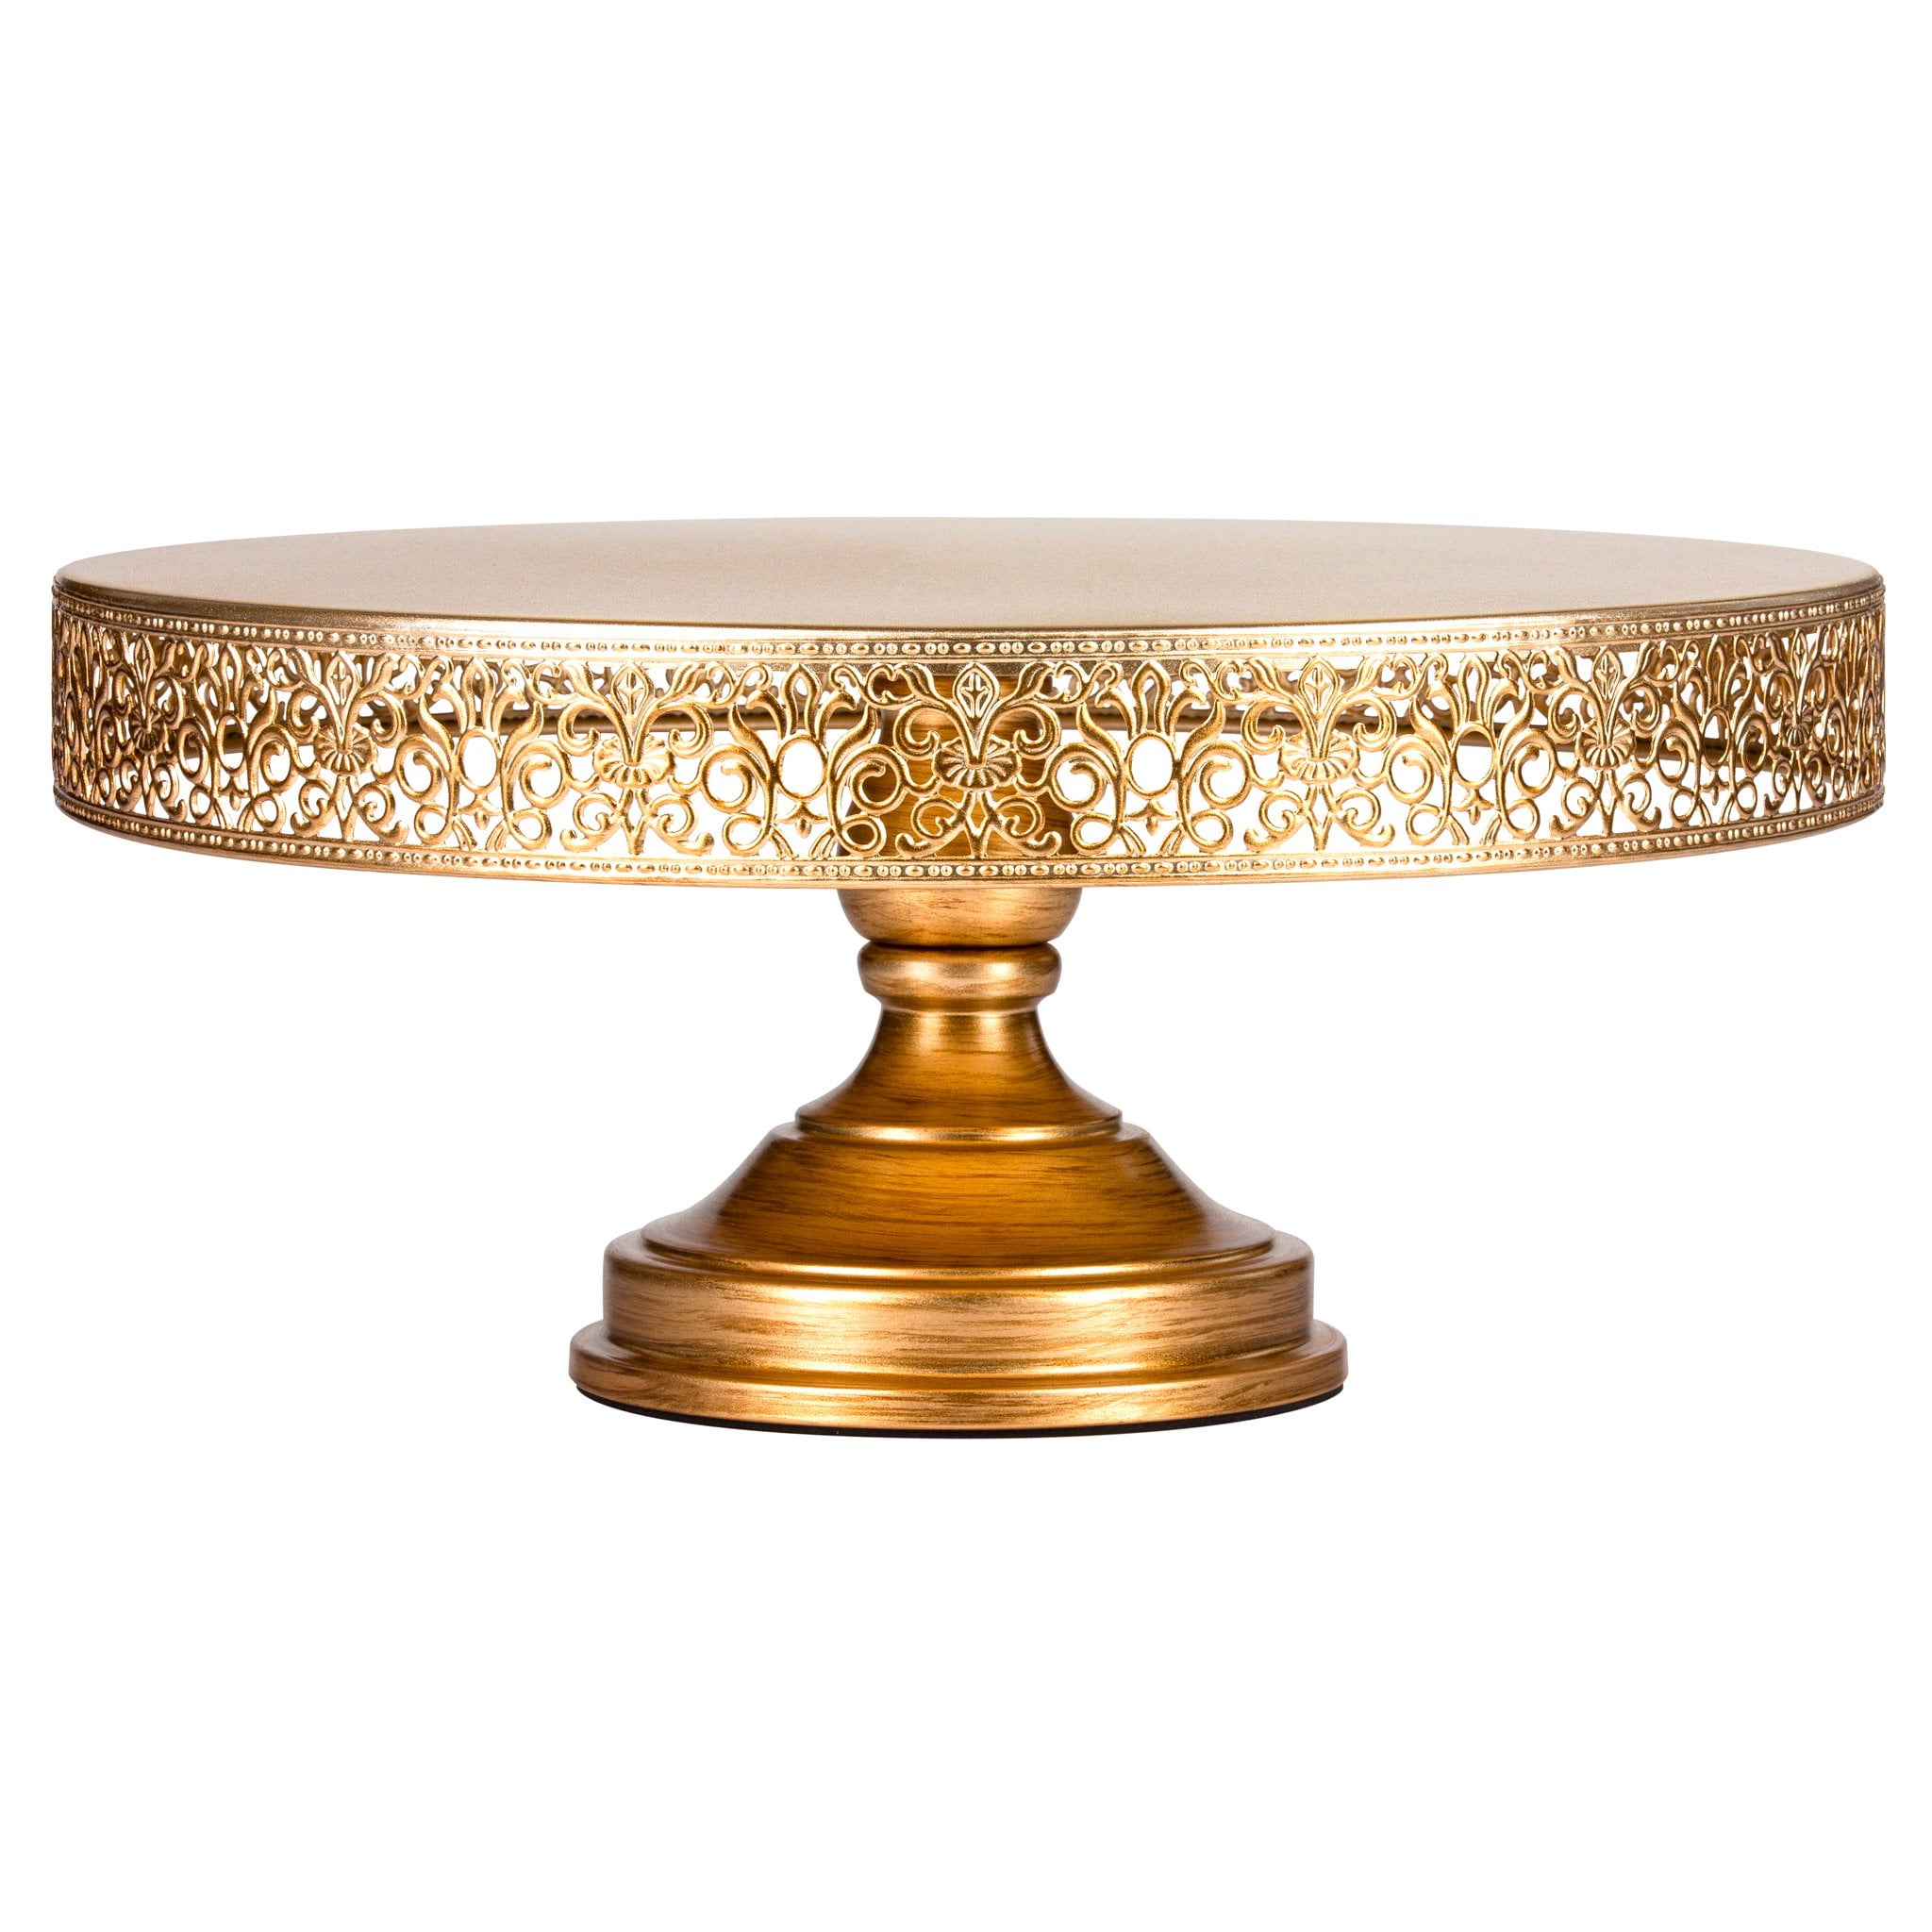 gold cake stand gold 16 inch cake stand gold cake pedestal wedding distressed gold 18 inch cake stand shabby white cake stand